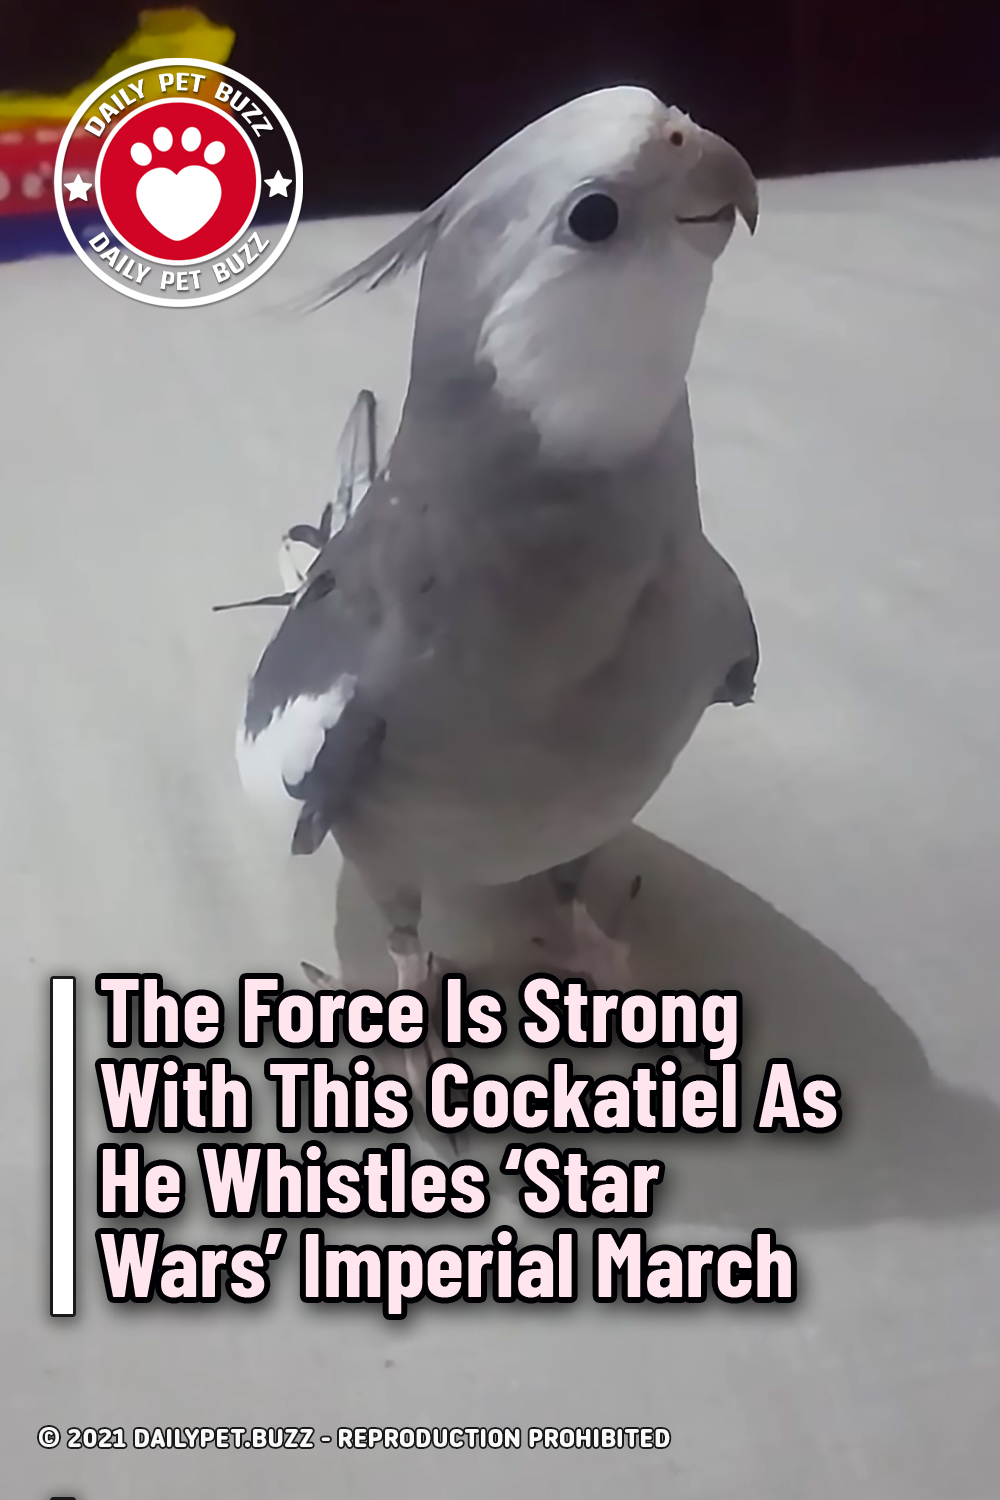 The Force Is Strong With This Cockatiel As He Whistles ‘Star Wars’ Imperial March